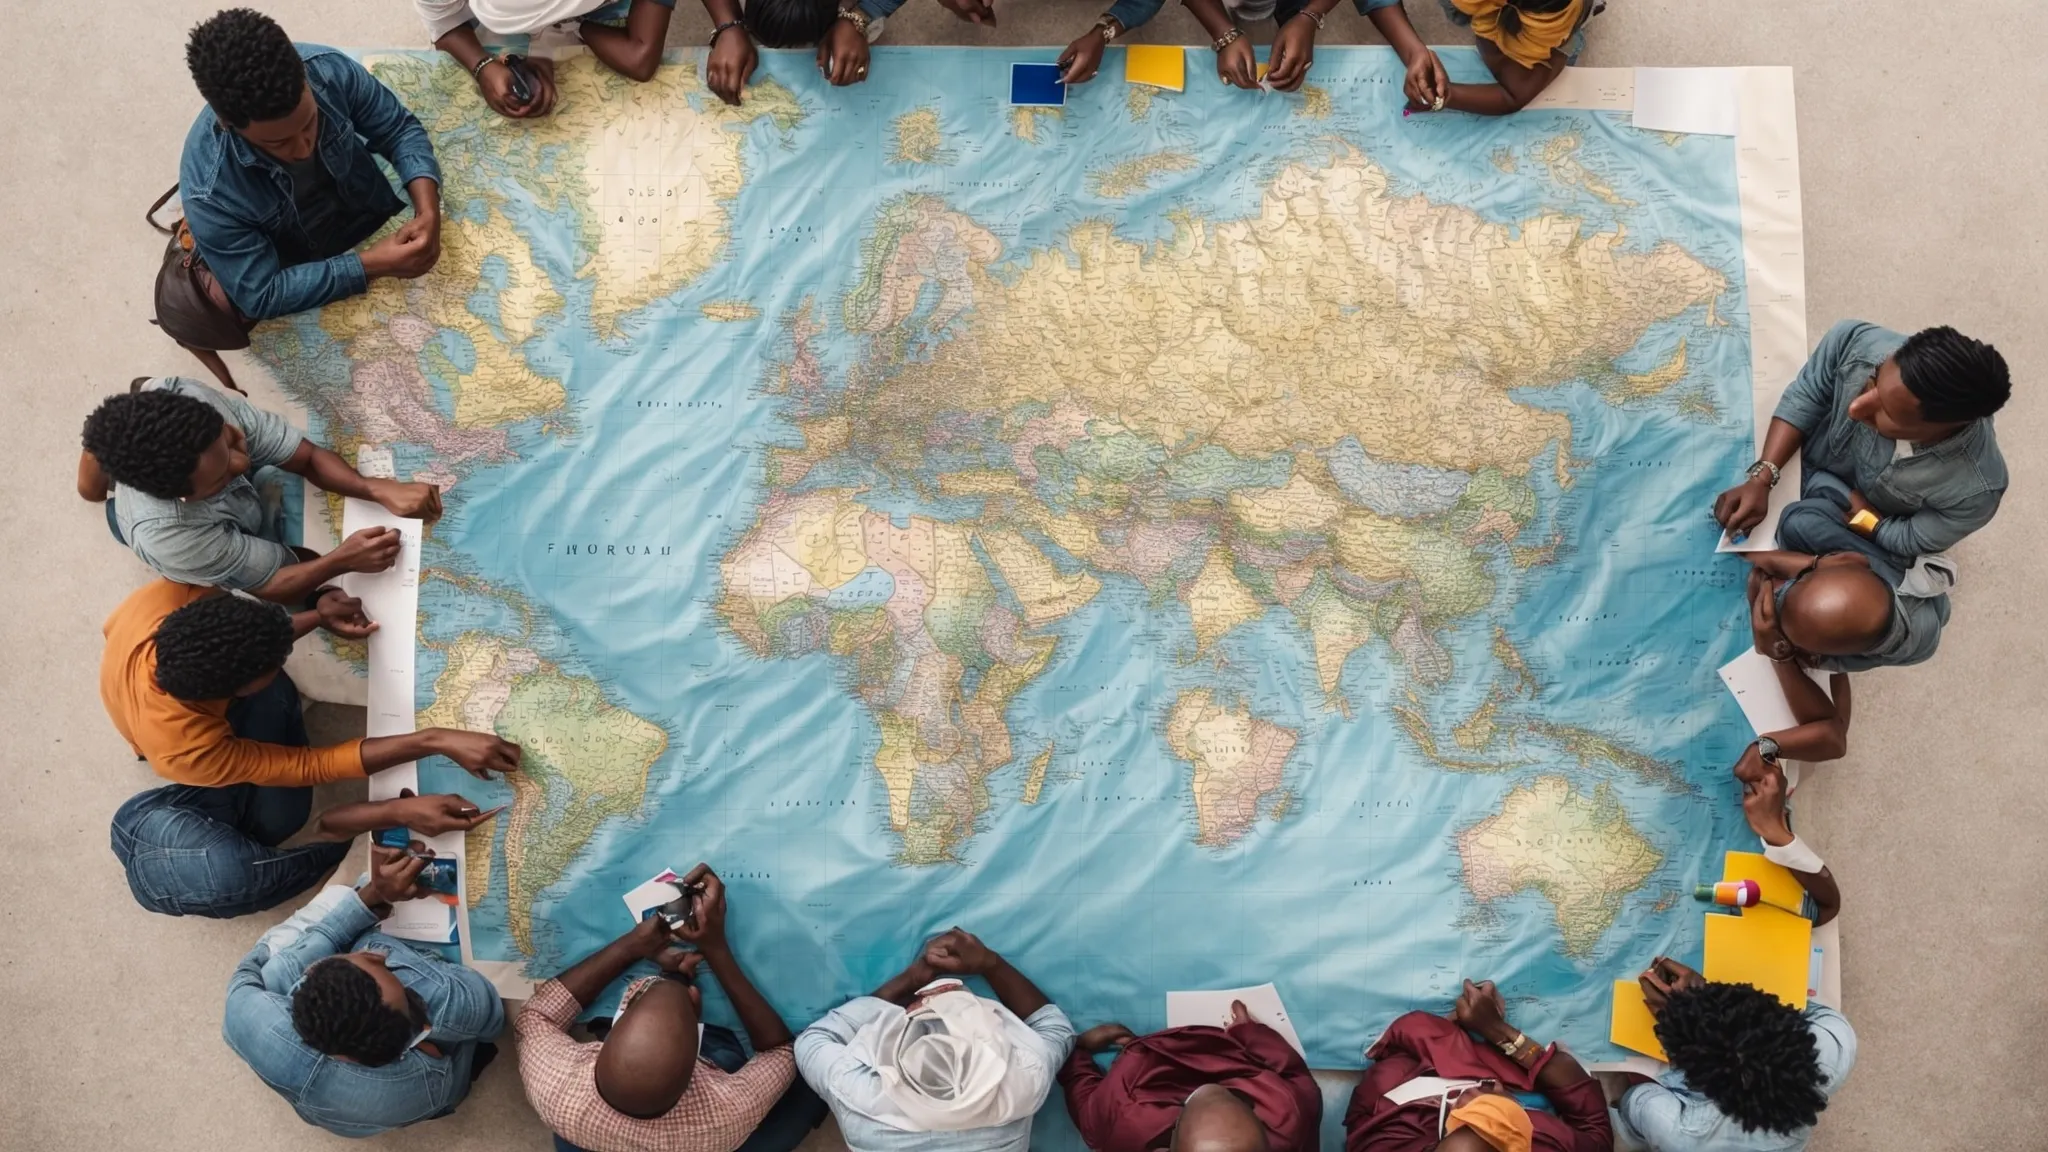 a group of diverse individuals gather around a world map, highlighting various countries with colorful markers.